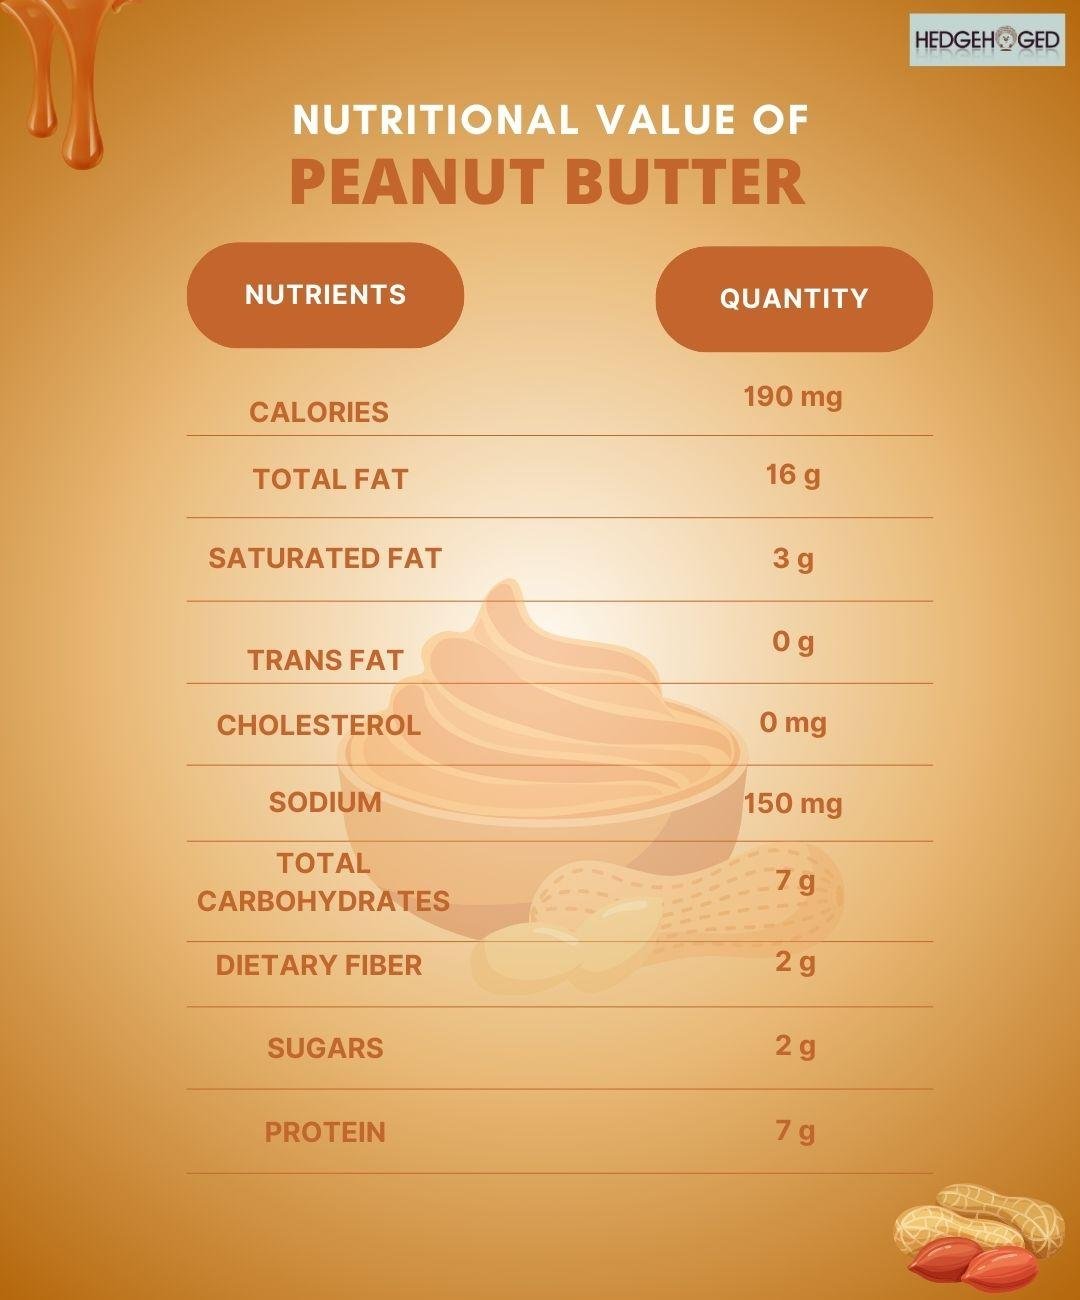 Nutritional Value of Peanut Butter